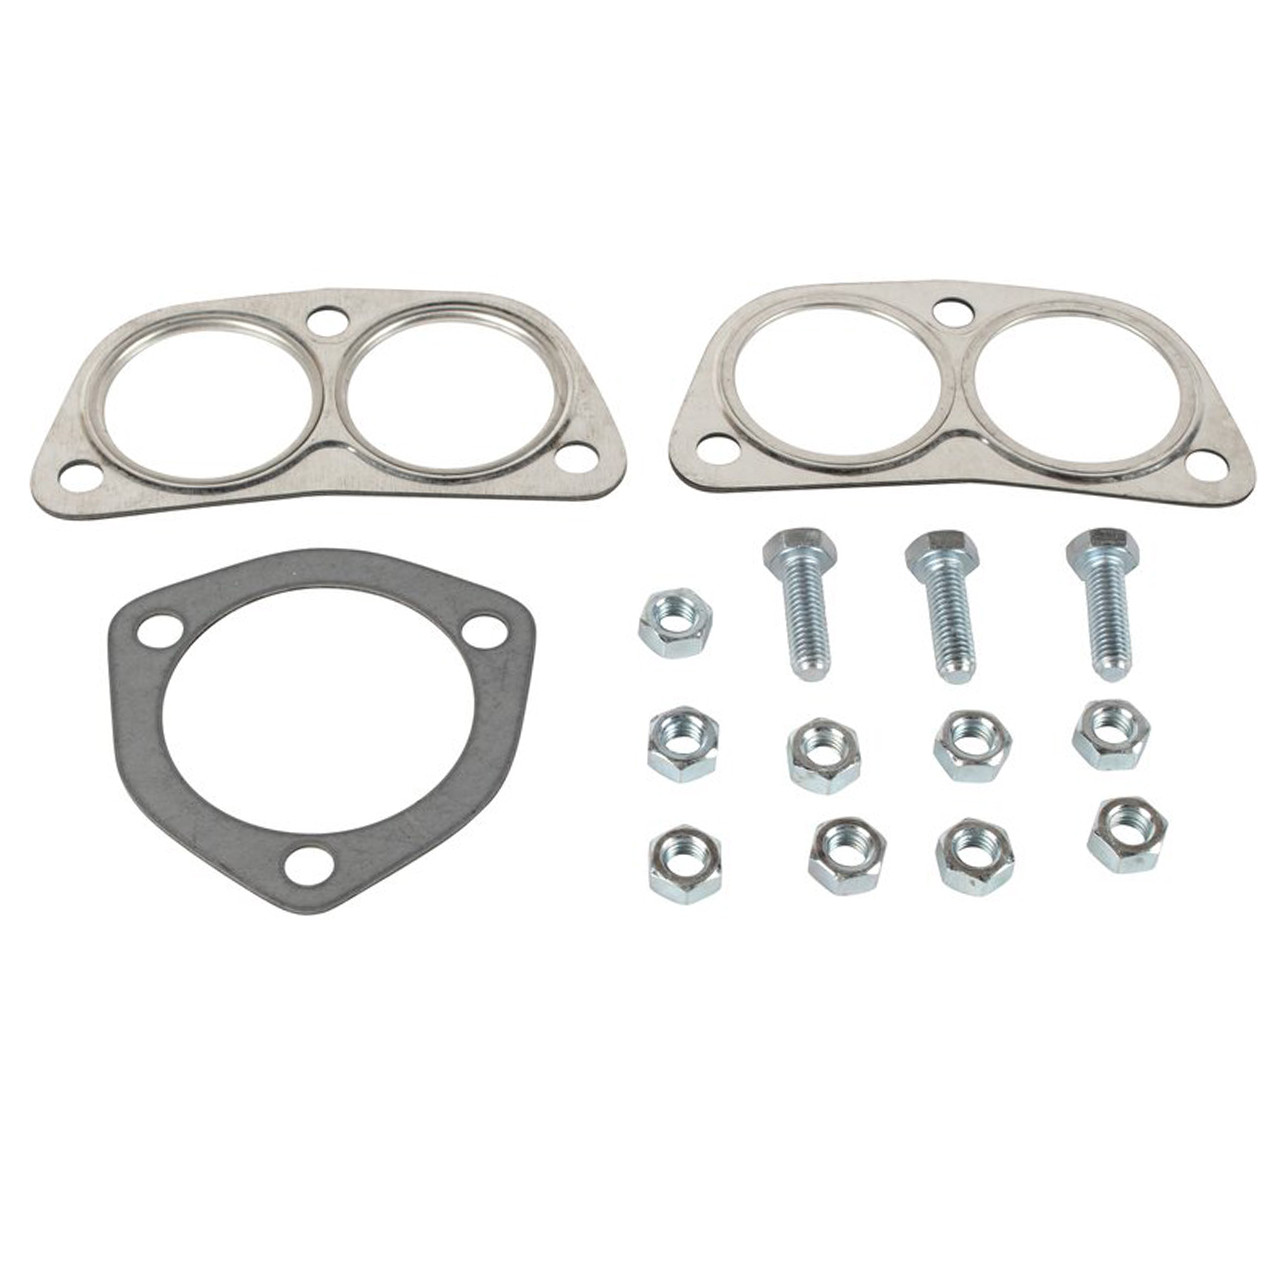 VWC-021-298-001-A - 021298001A - DANSK - MUFFLER AND EXHAUST TAILPIPE  INSTALLATION KIT - BUS 72-74 - VANAGON 80-83 AIRCOOLED MODELS - VW TYPE-4  74-75 